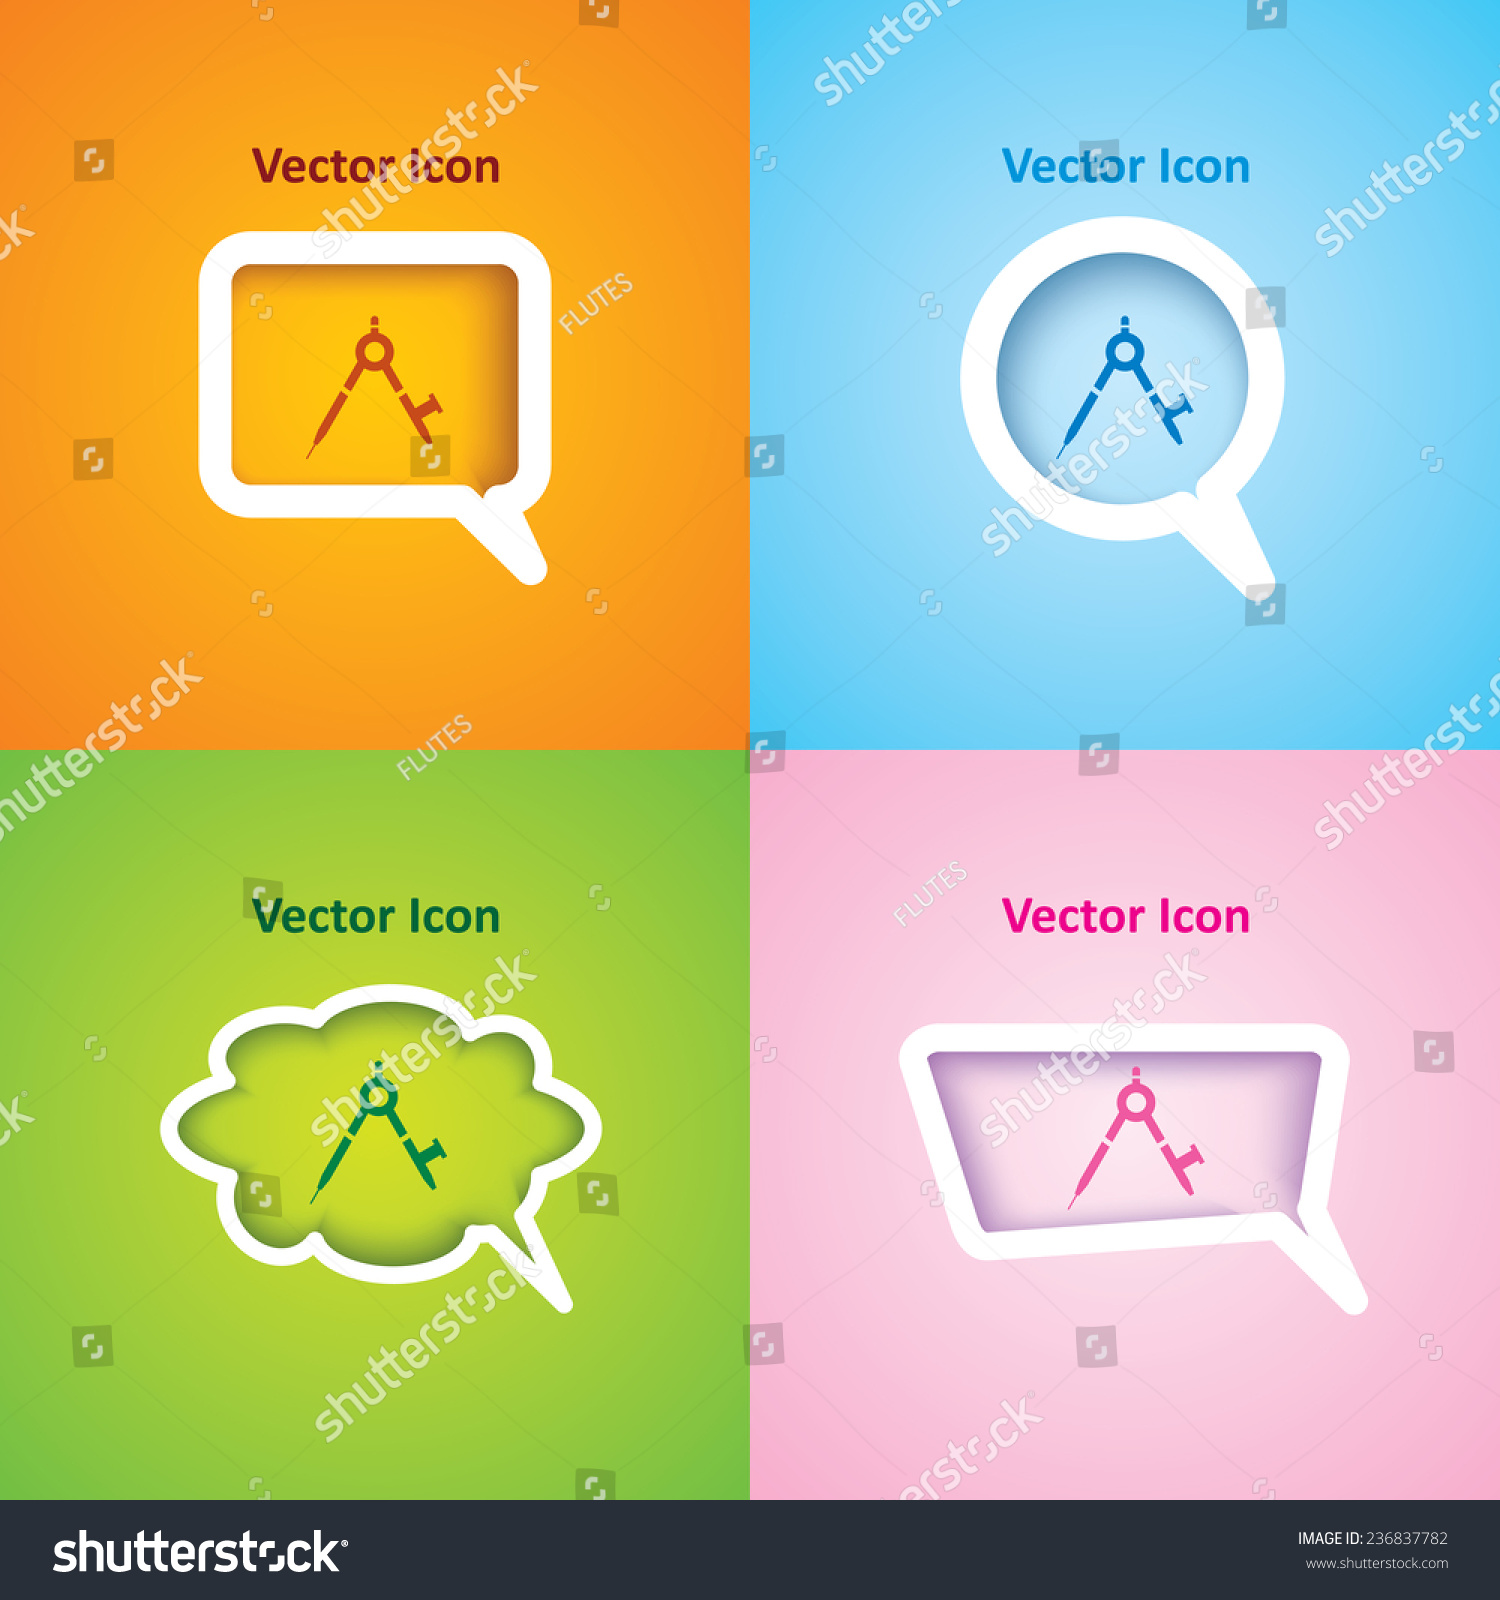 Icon Of Math Compass On Four Kinds Of Speech Bubble With Four Different